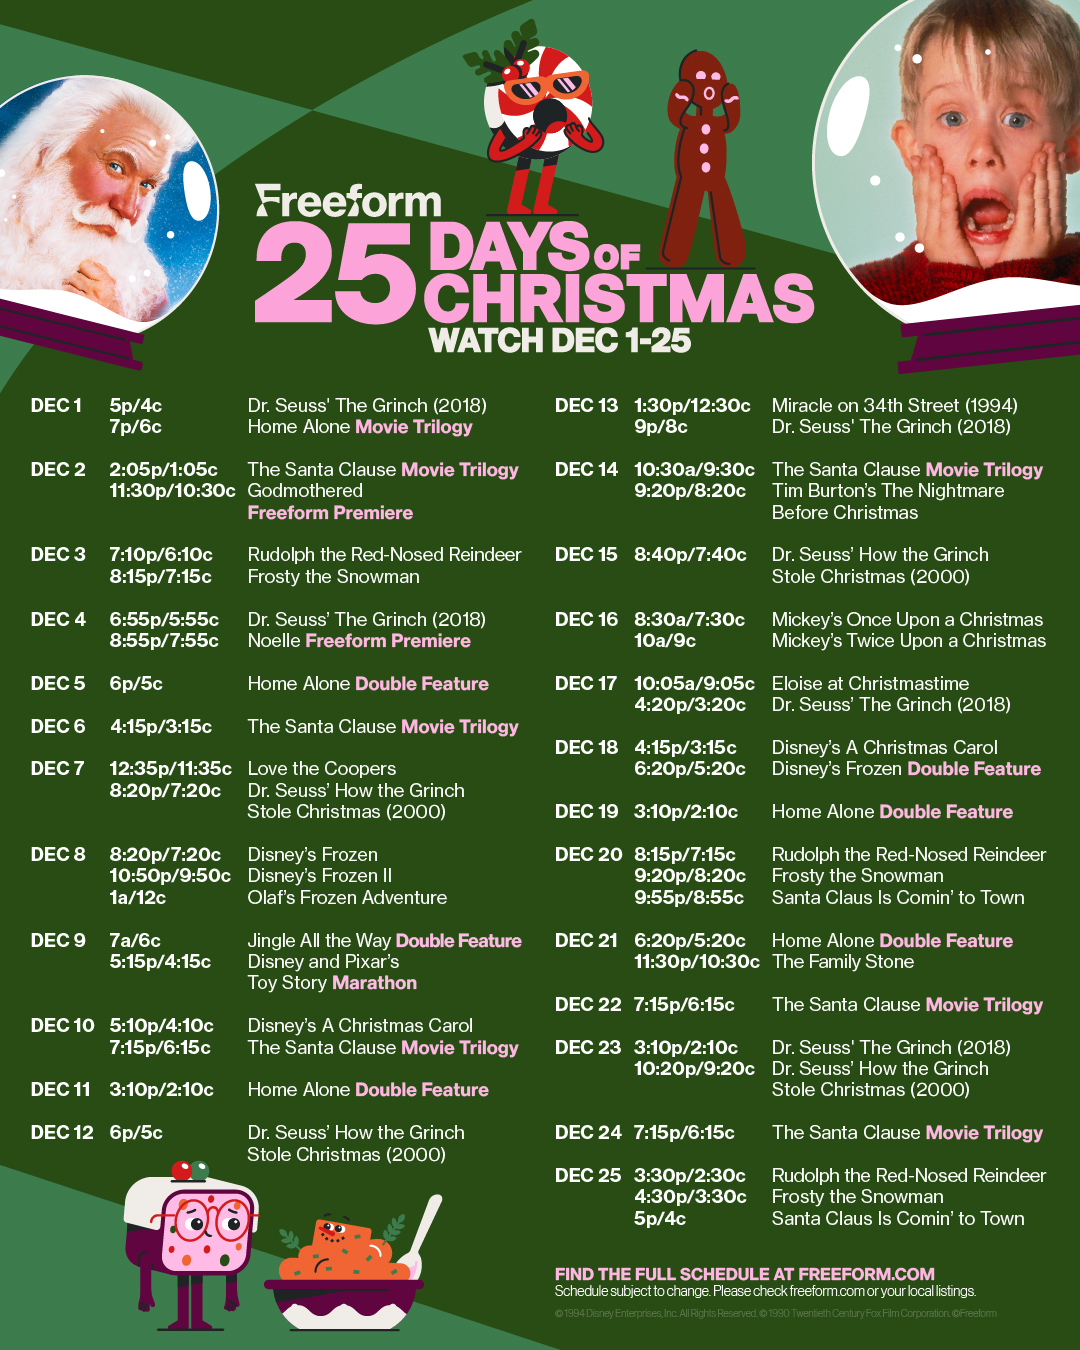 The 25 Days of Christmas returns to Freeform December 1st Holiday TV